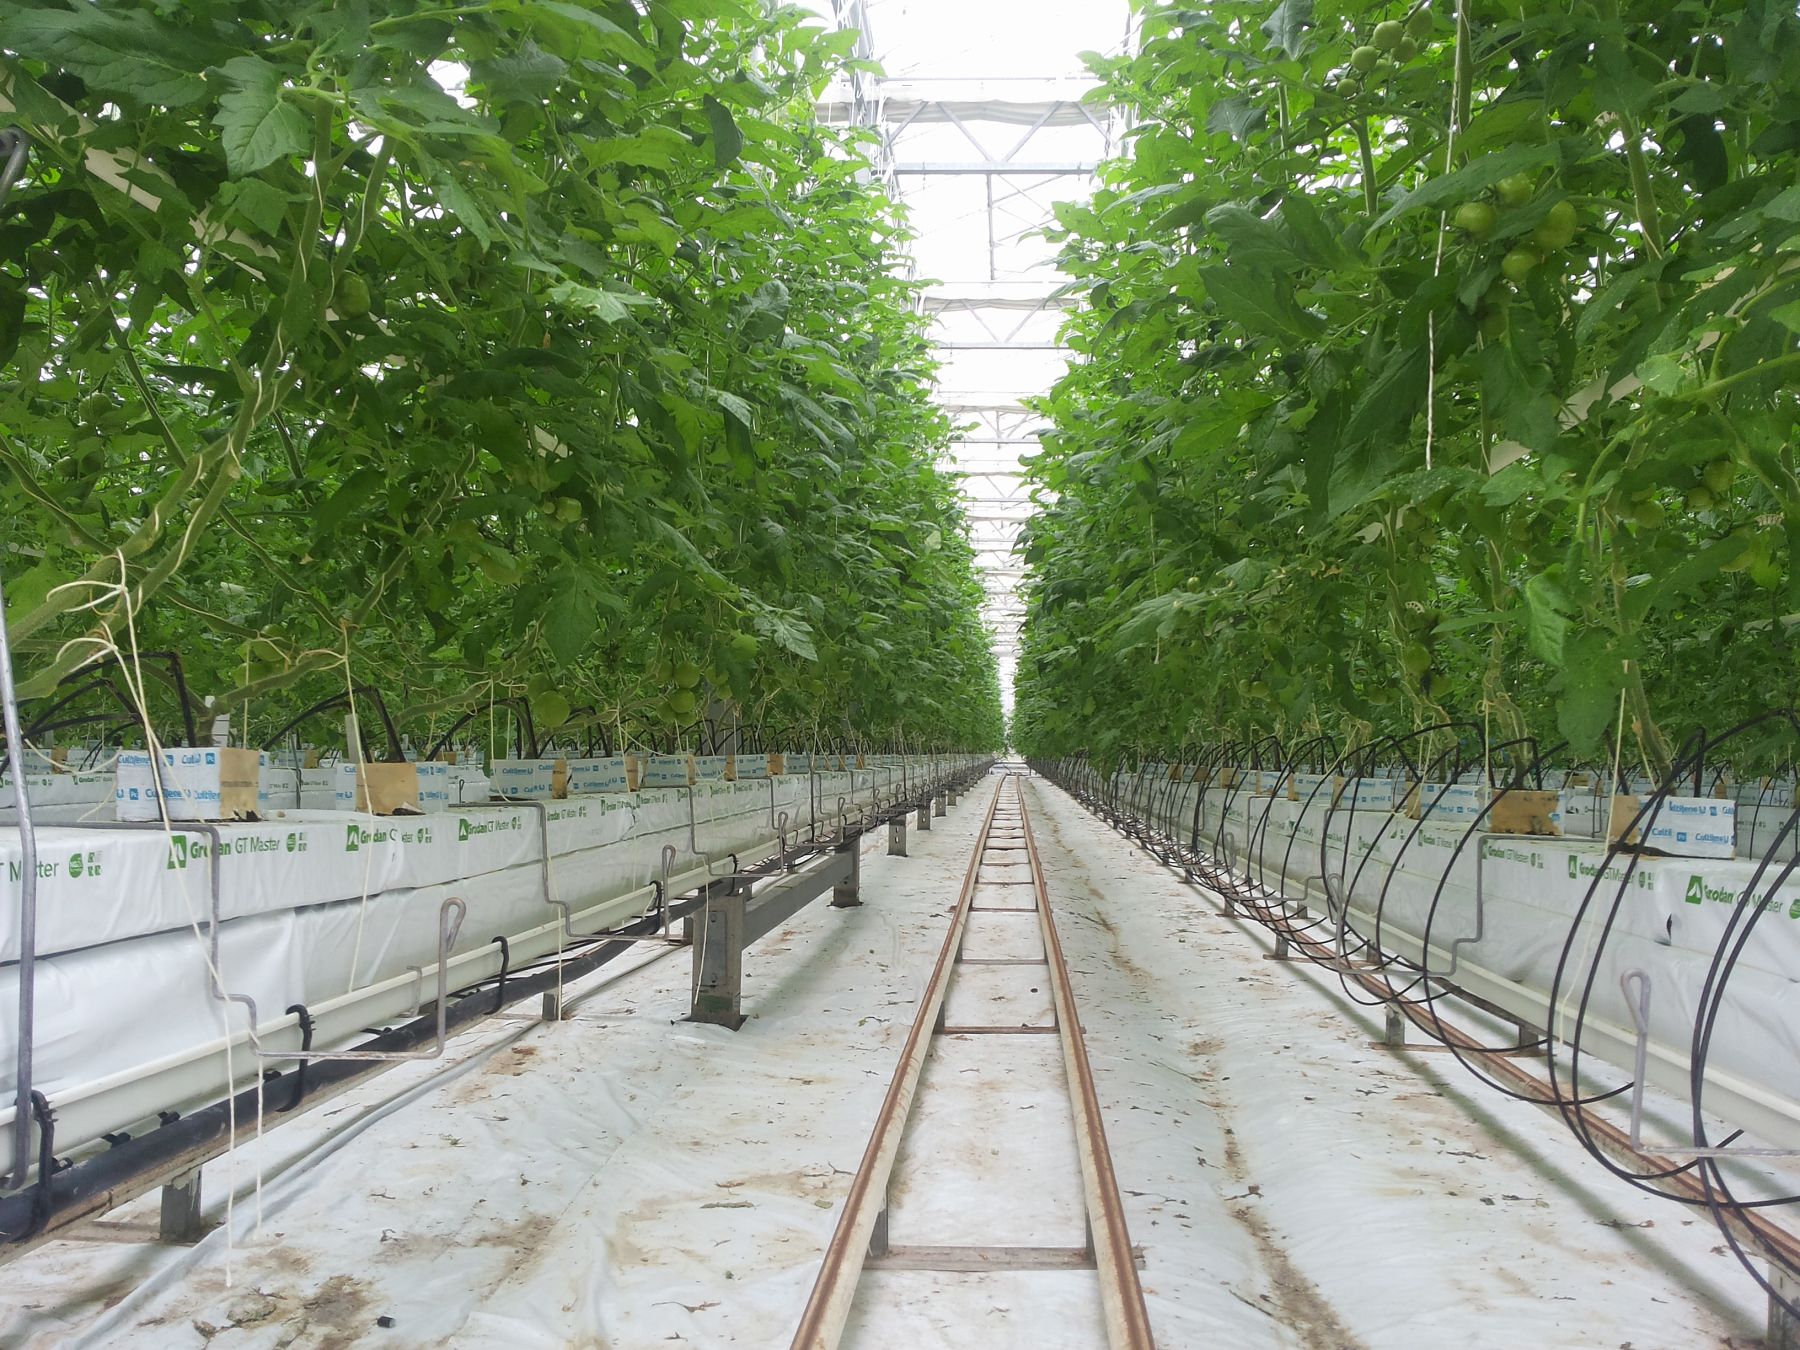 Tomatoes in a hydroponic system at the IGZ (c) Stefan Karlowsky